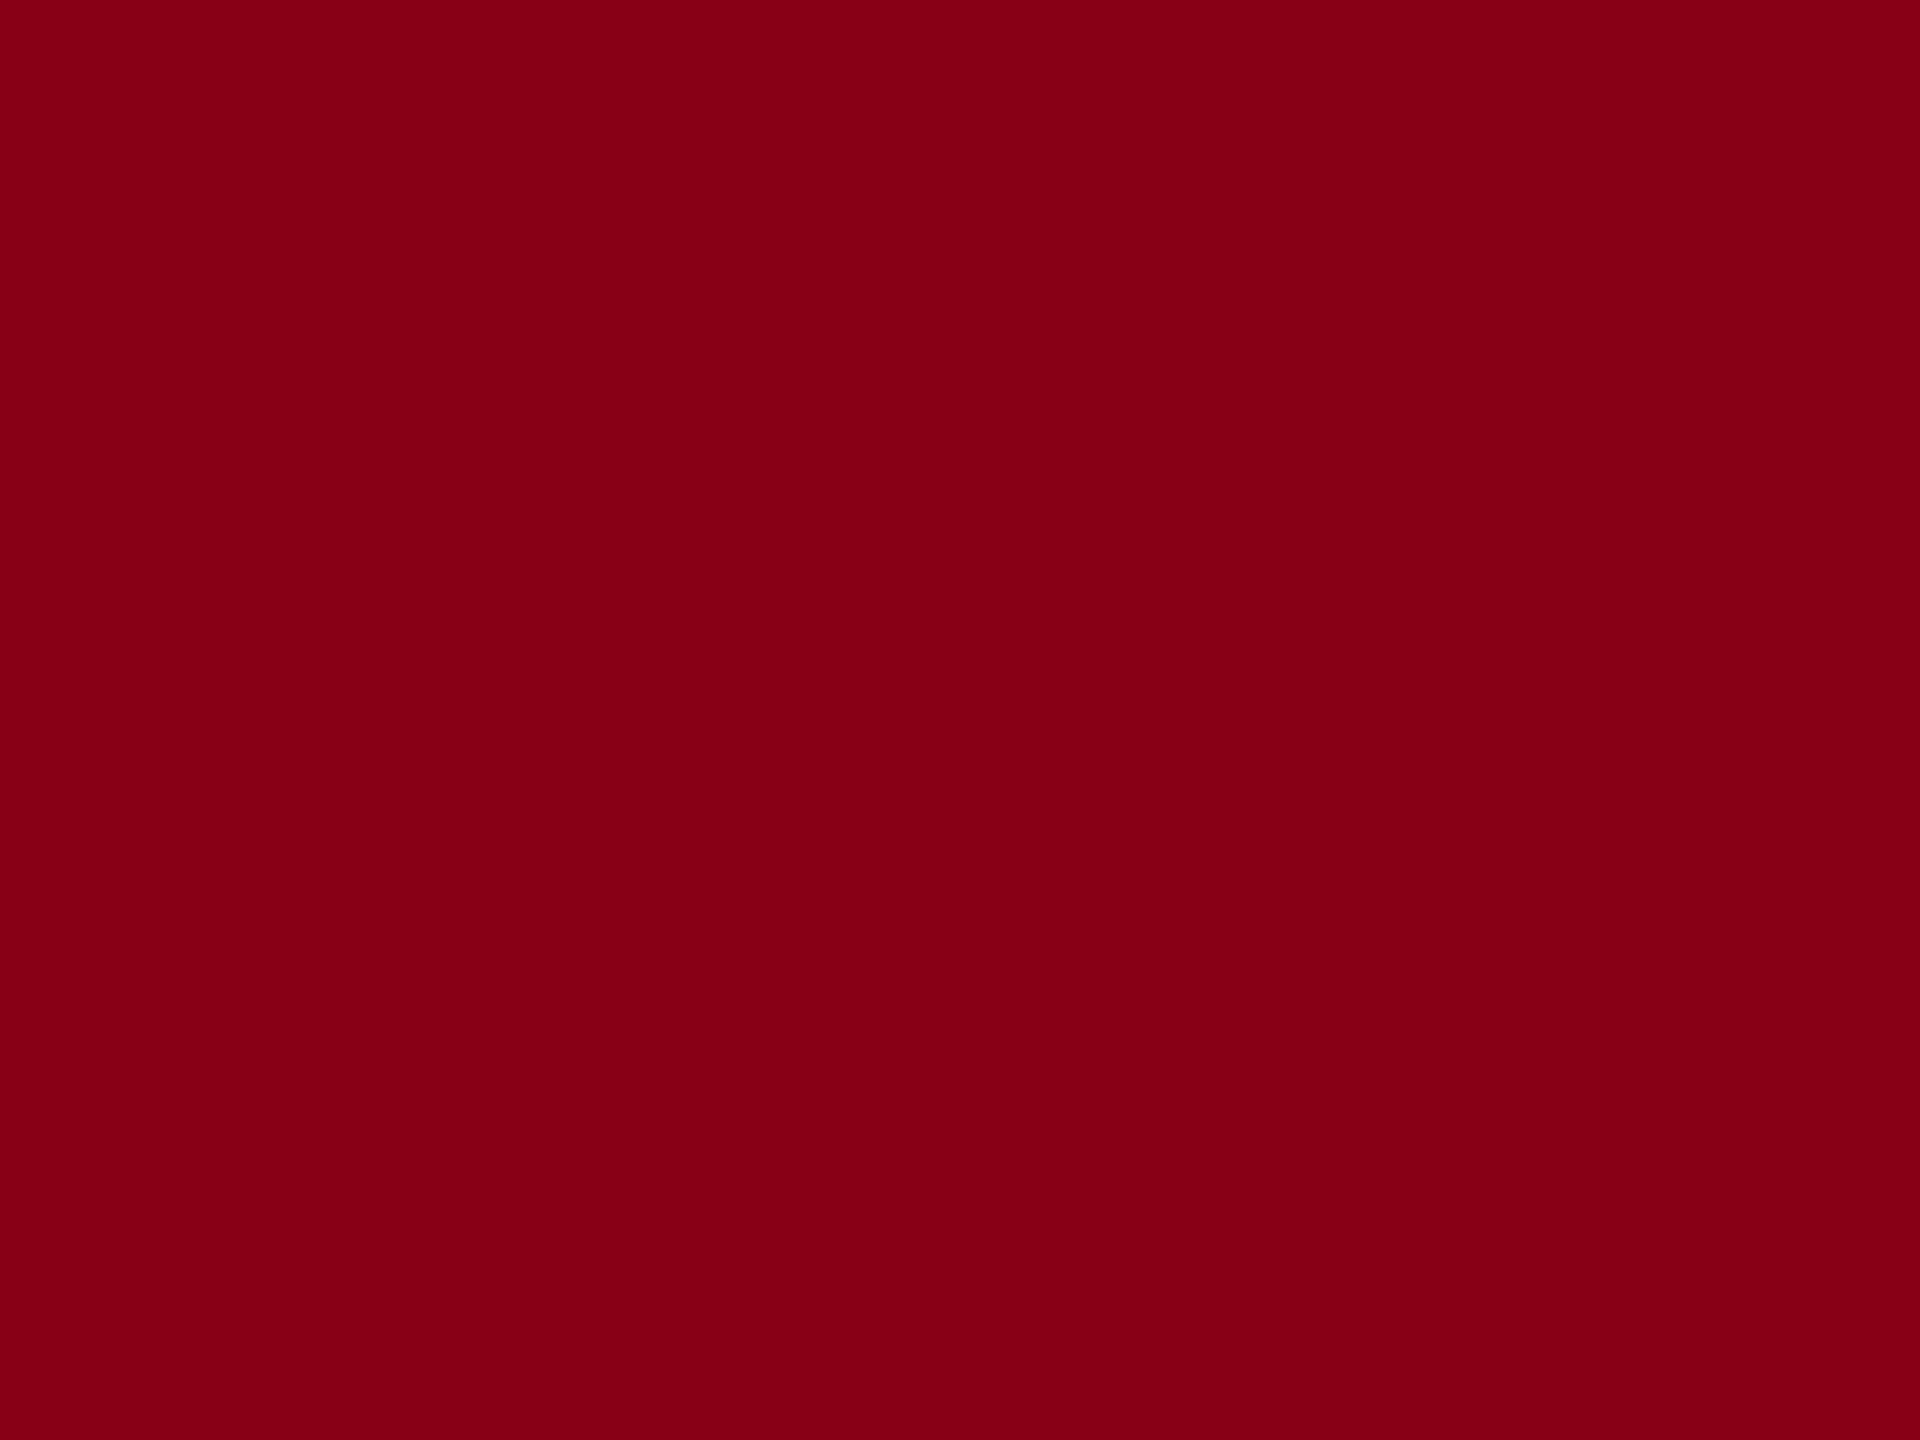 Dark red background free HD public domain picture